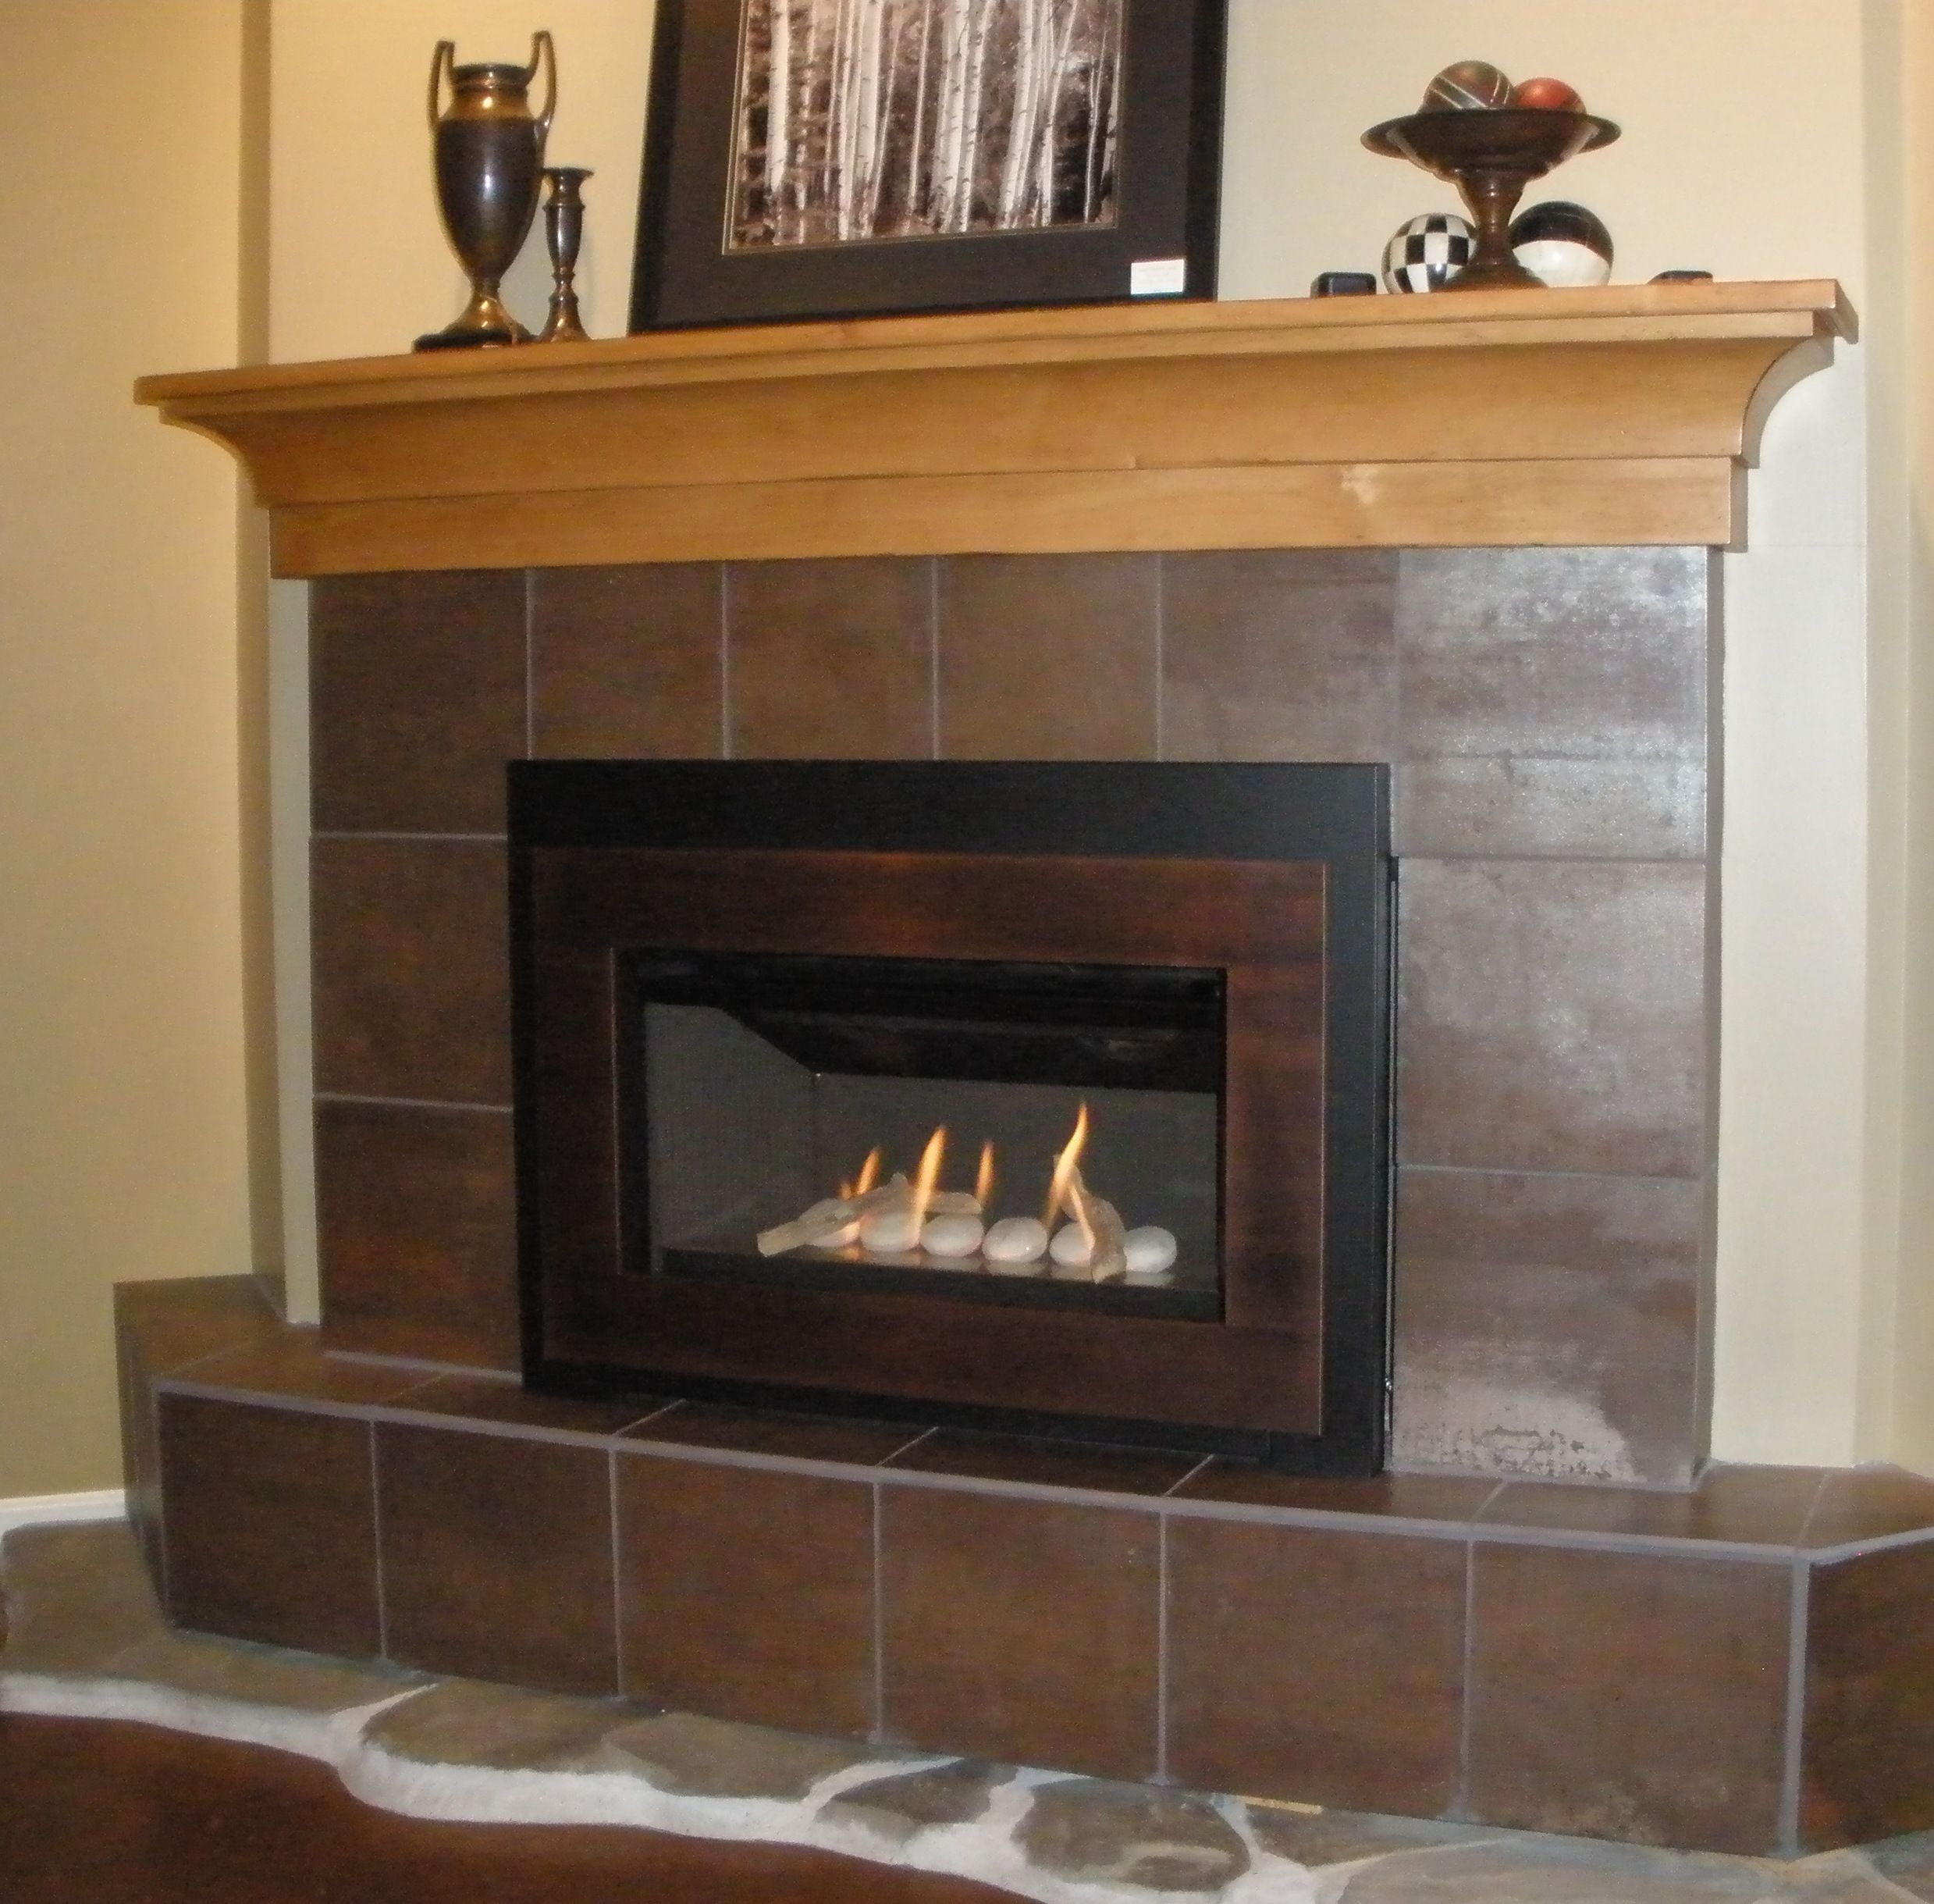 Front Vent Electric Fireplace Luxury Pin On Valor Radiant Gas Fireplaces Midwest Dealer